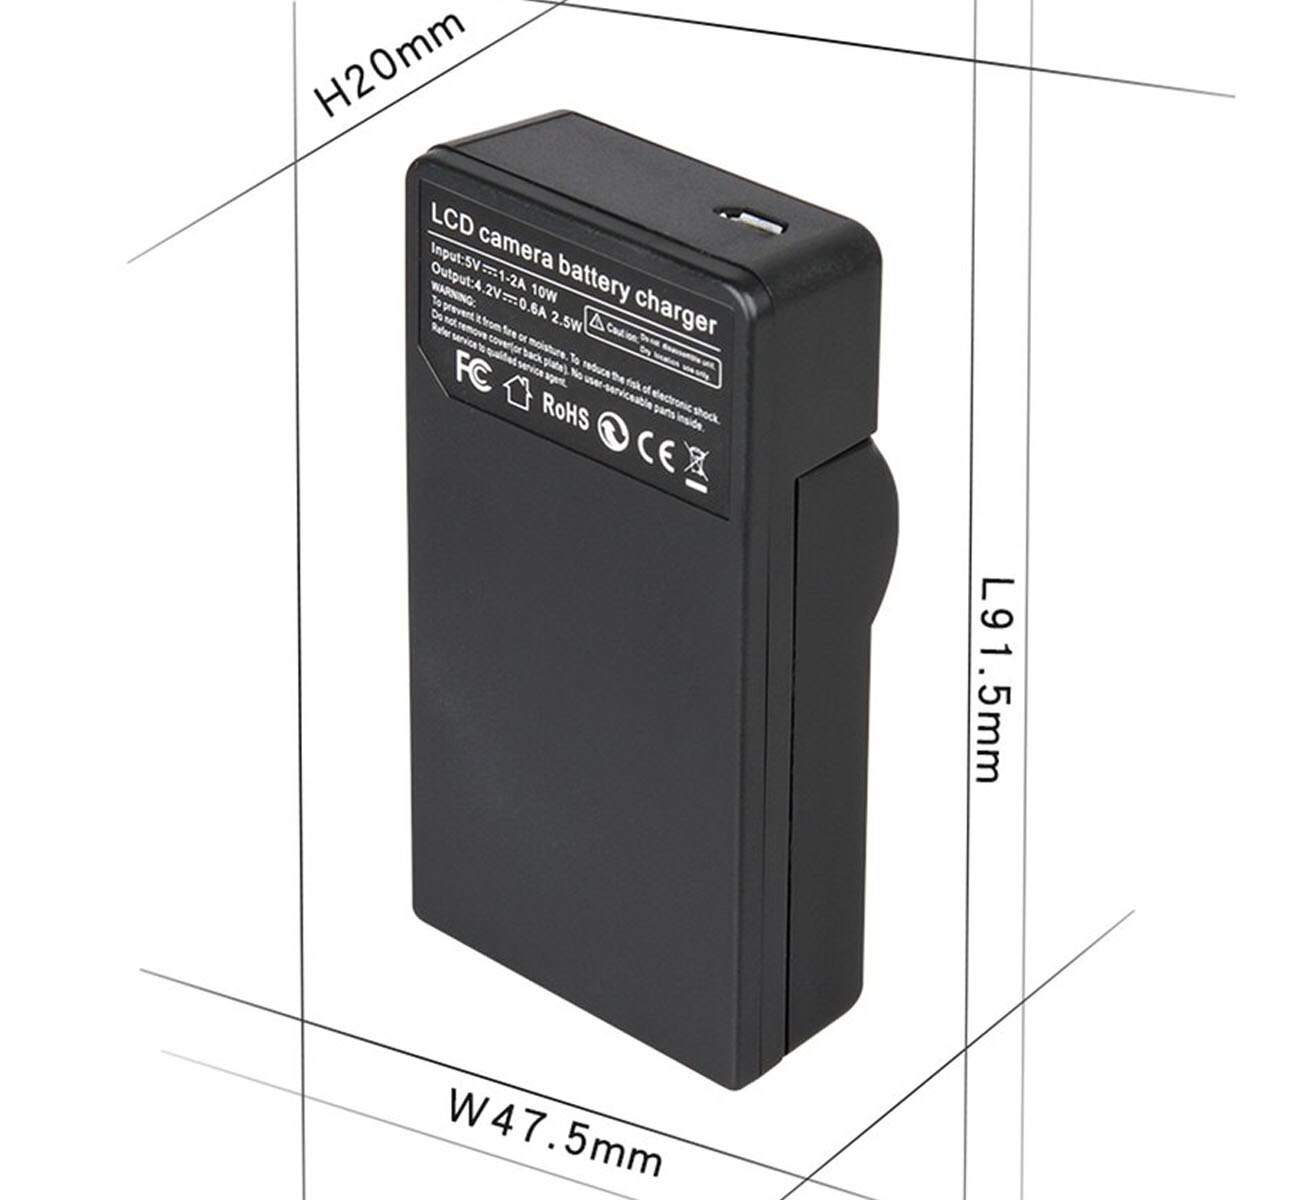 Batterij Lader Voor Nikon Coolpix AW110s, AW120s, AW130s, W300, B600, A900, A1000 Digitale Camera